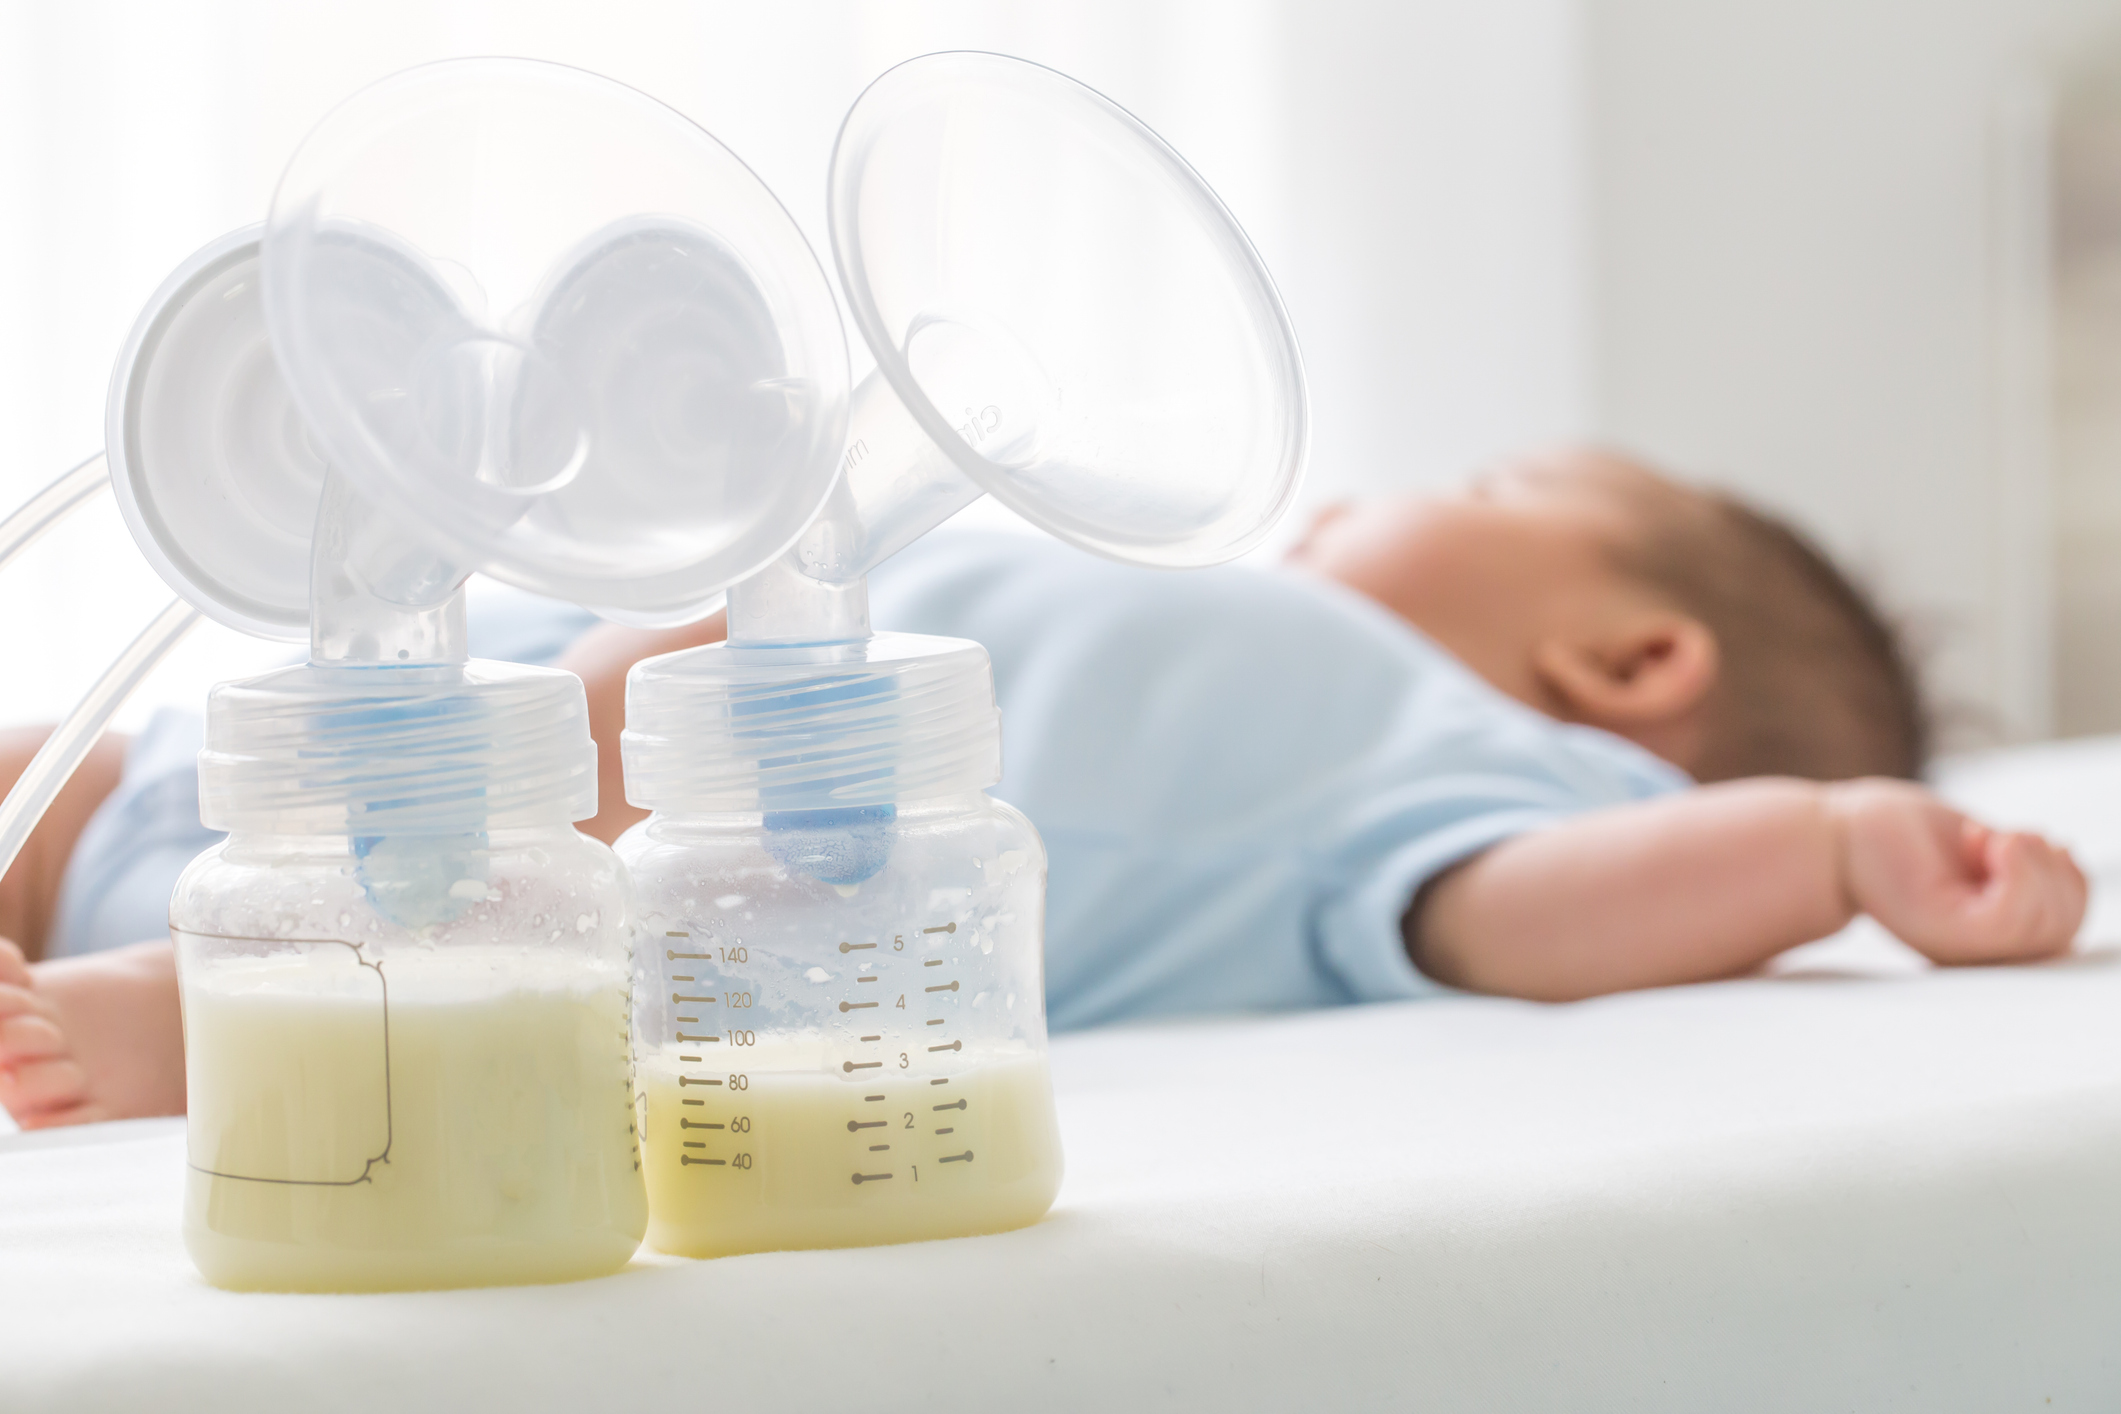 Mixed messaging for mums on breast milk storage guidelines